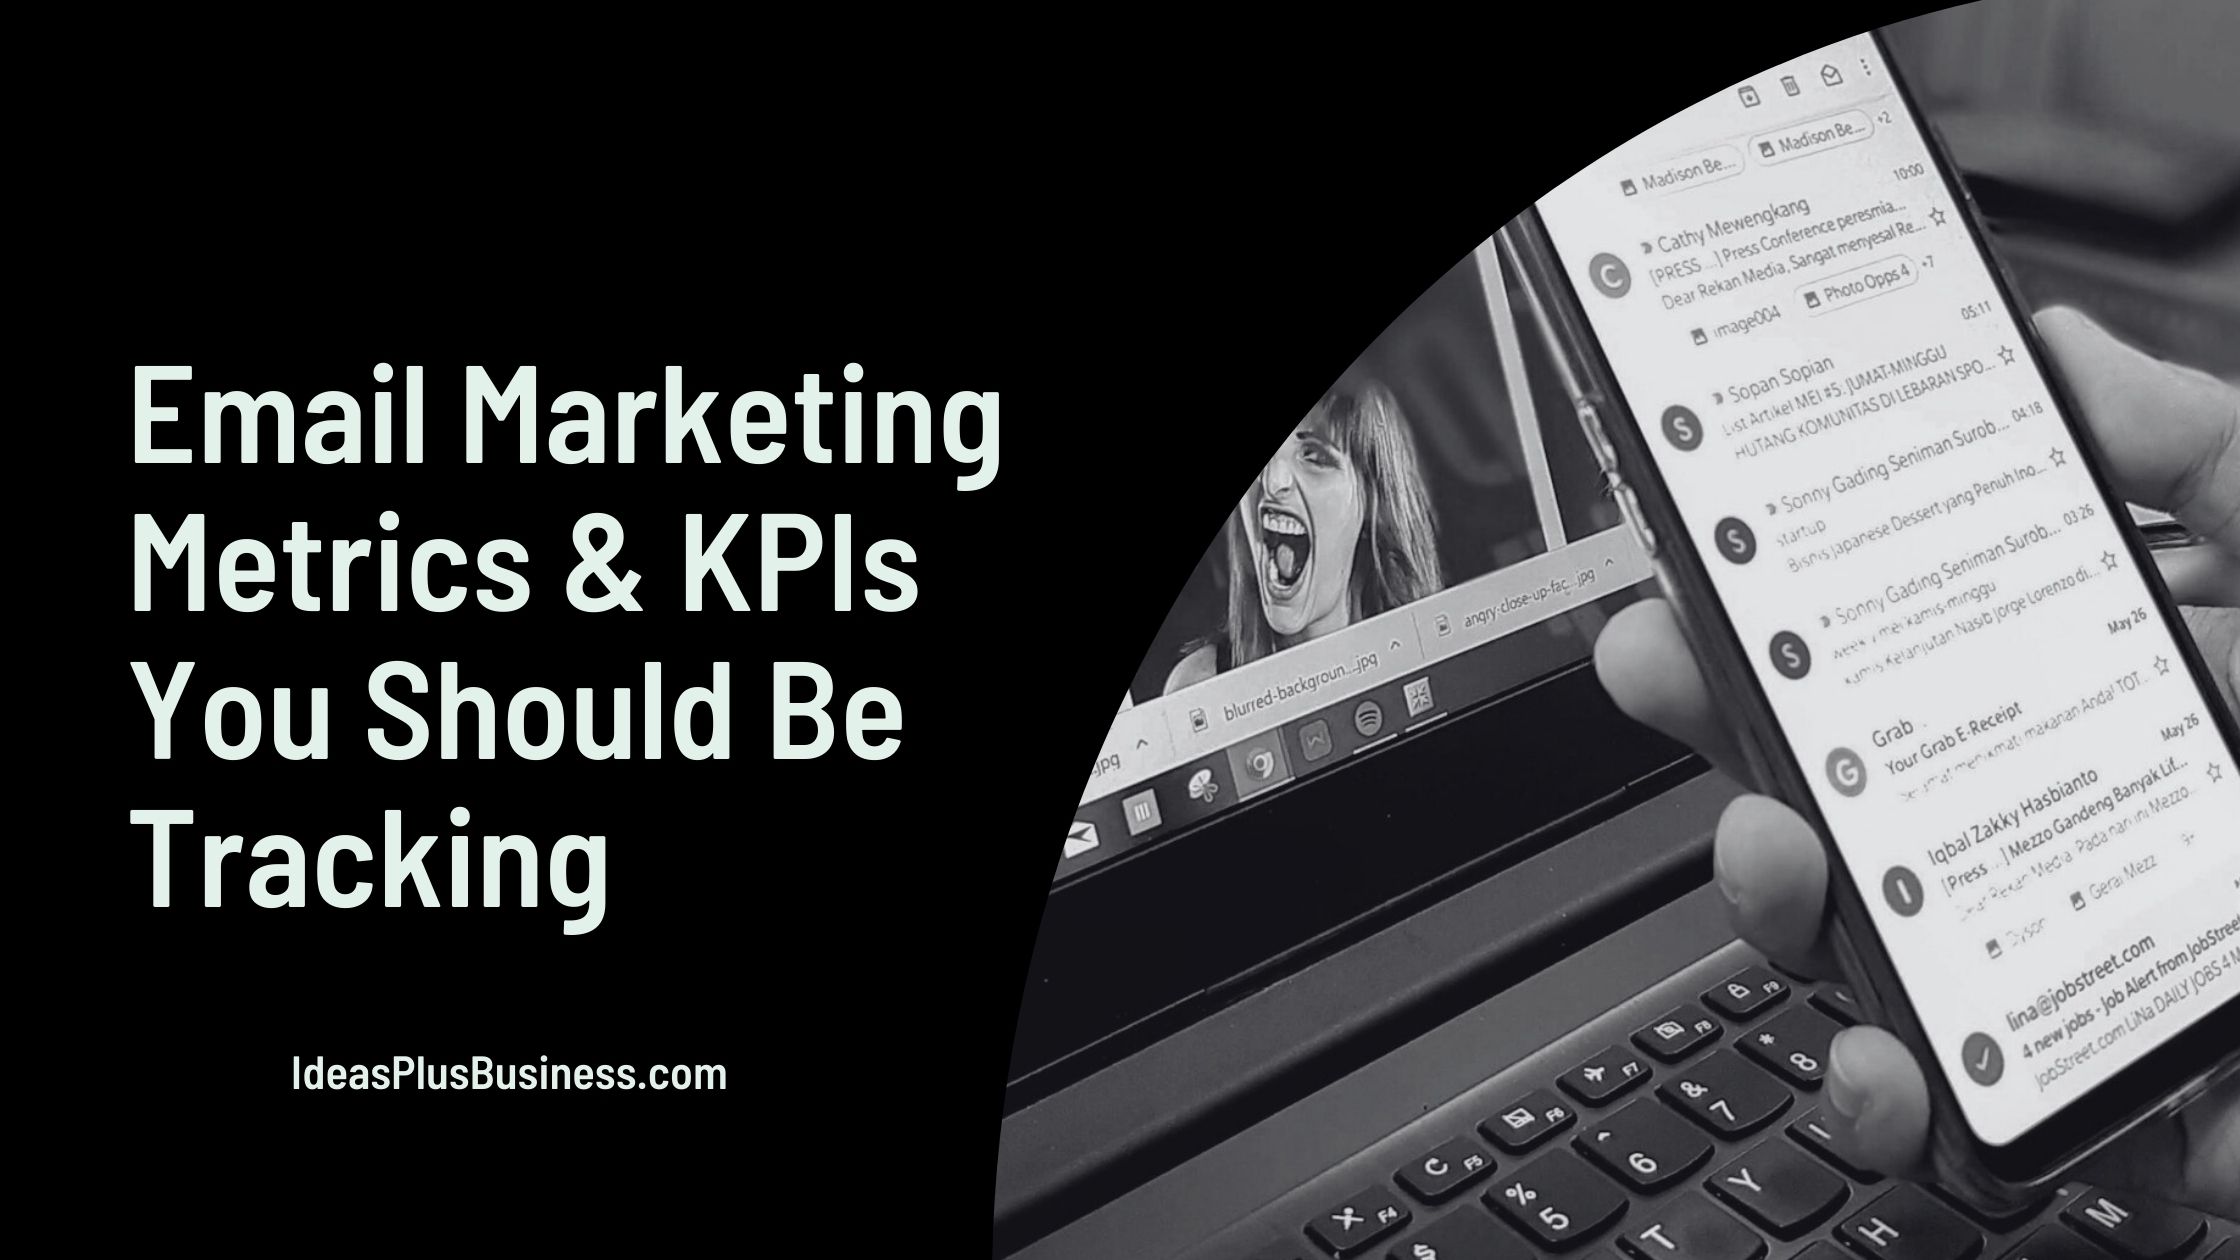 11 Top Email Marketing Metrics & KPIs You Should Be Tracking